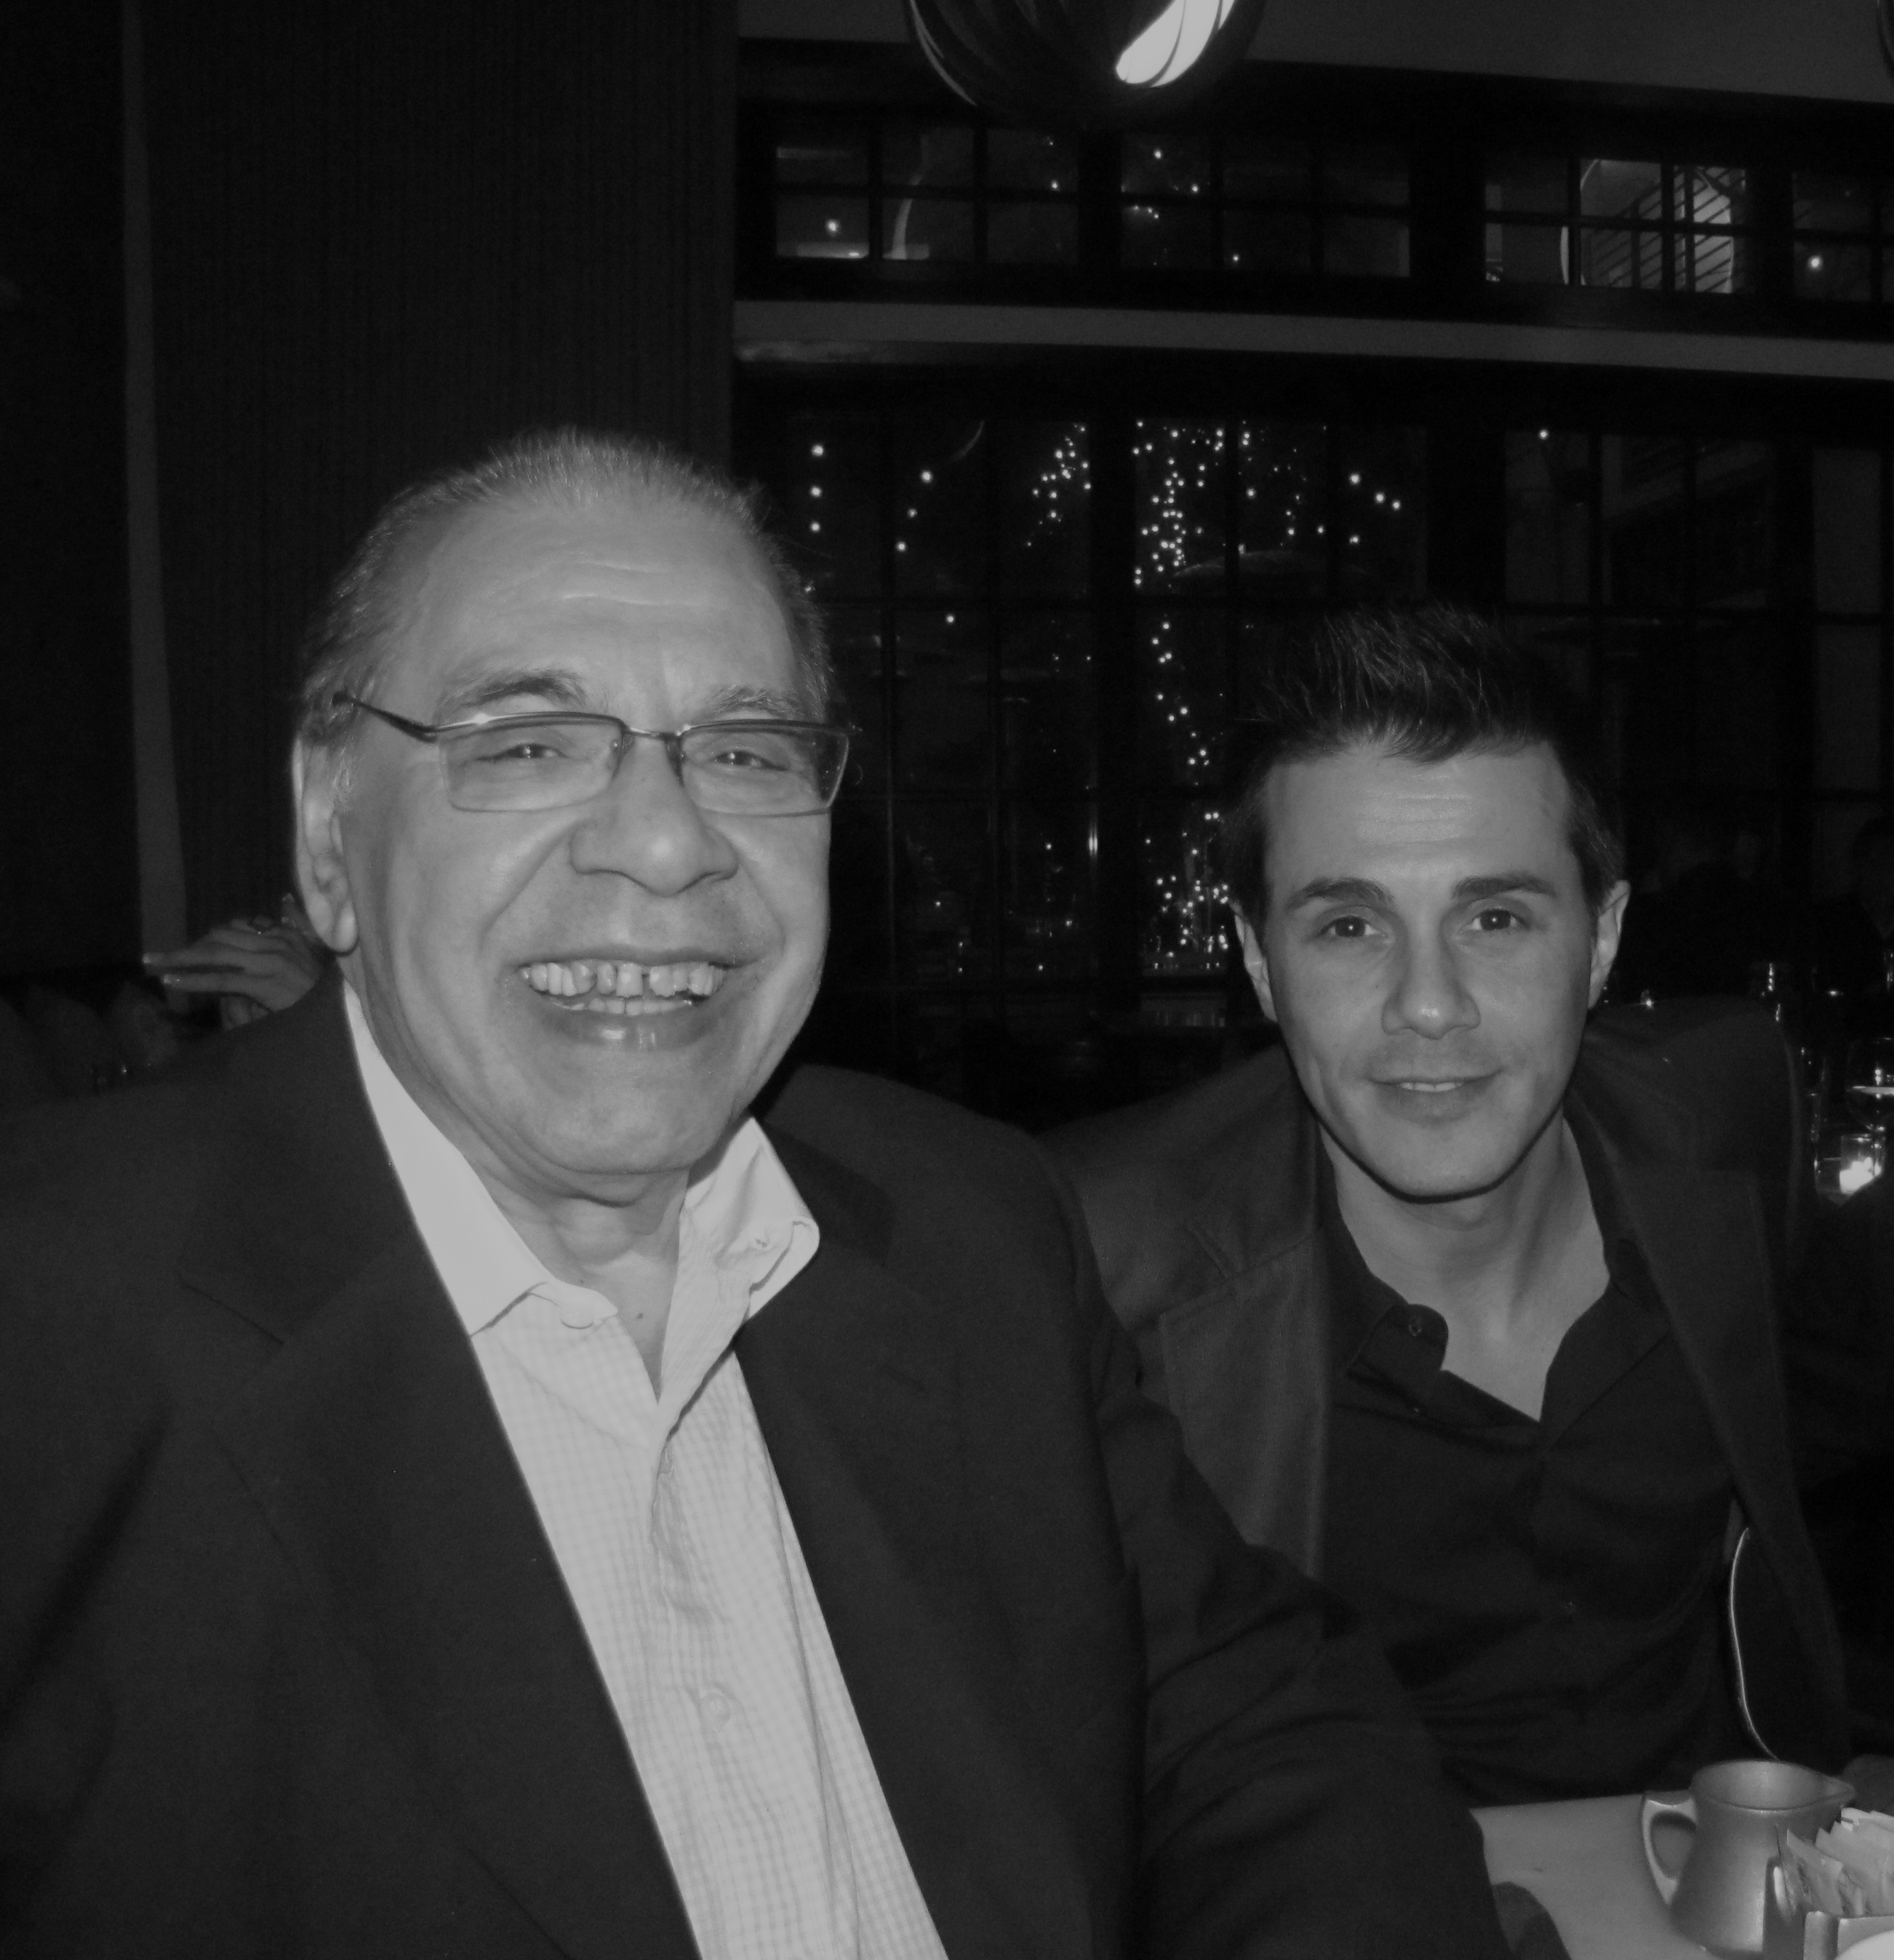 Fer with Enrique Pinti in LA. One of the greatest Argentine actors/comedians of all time.